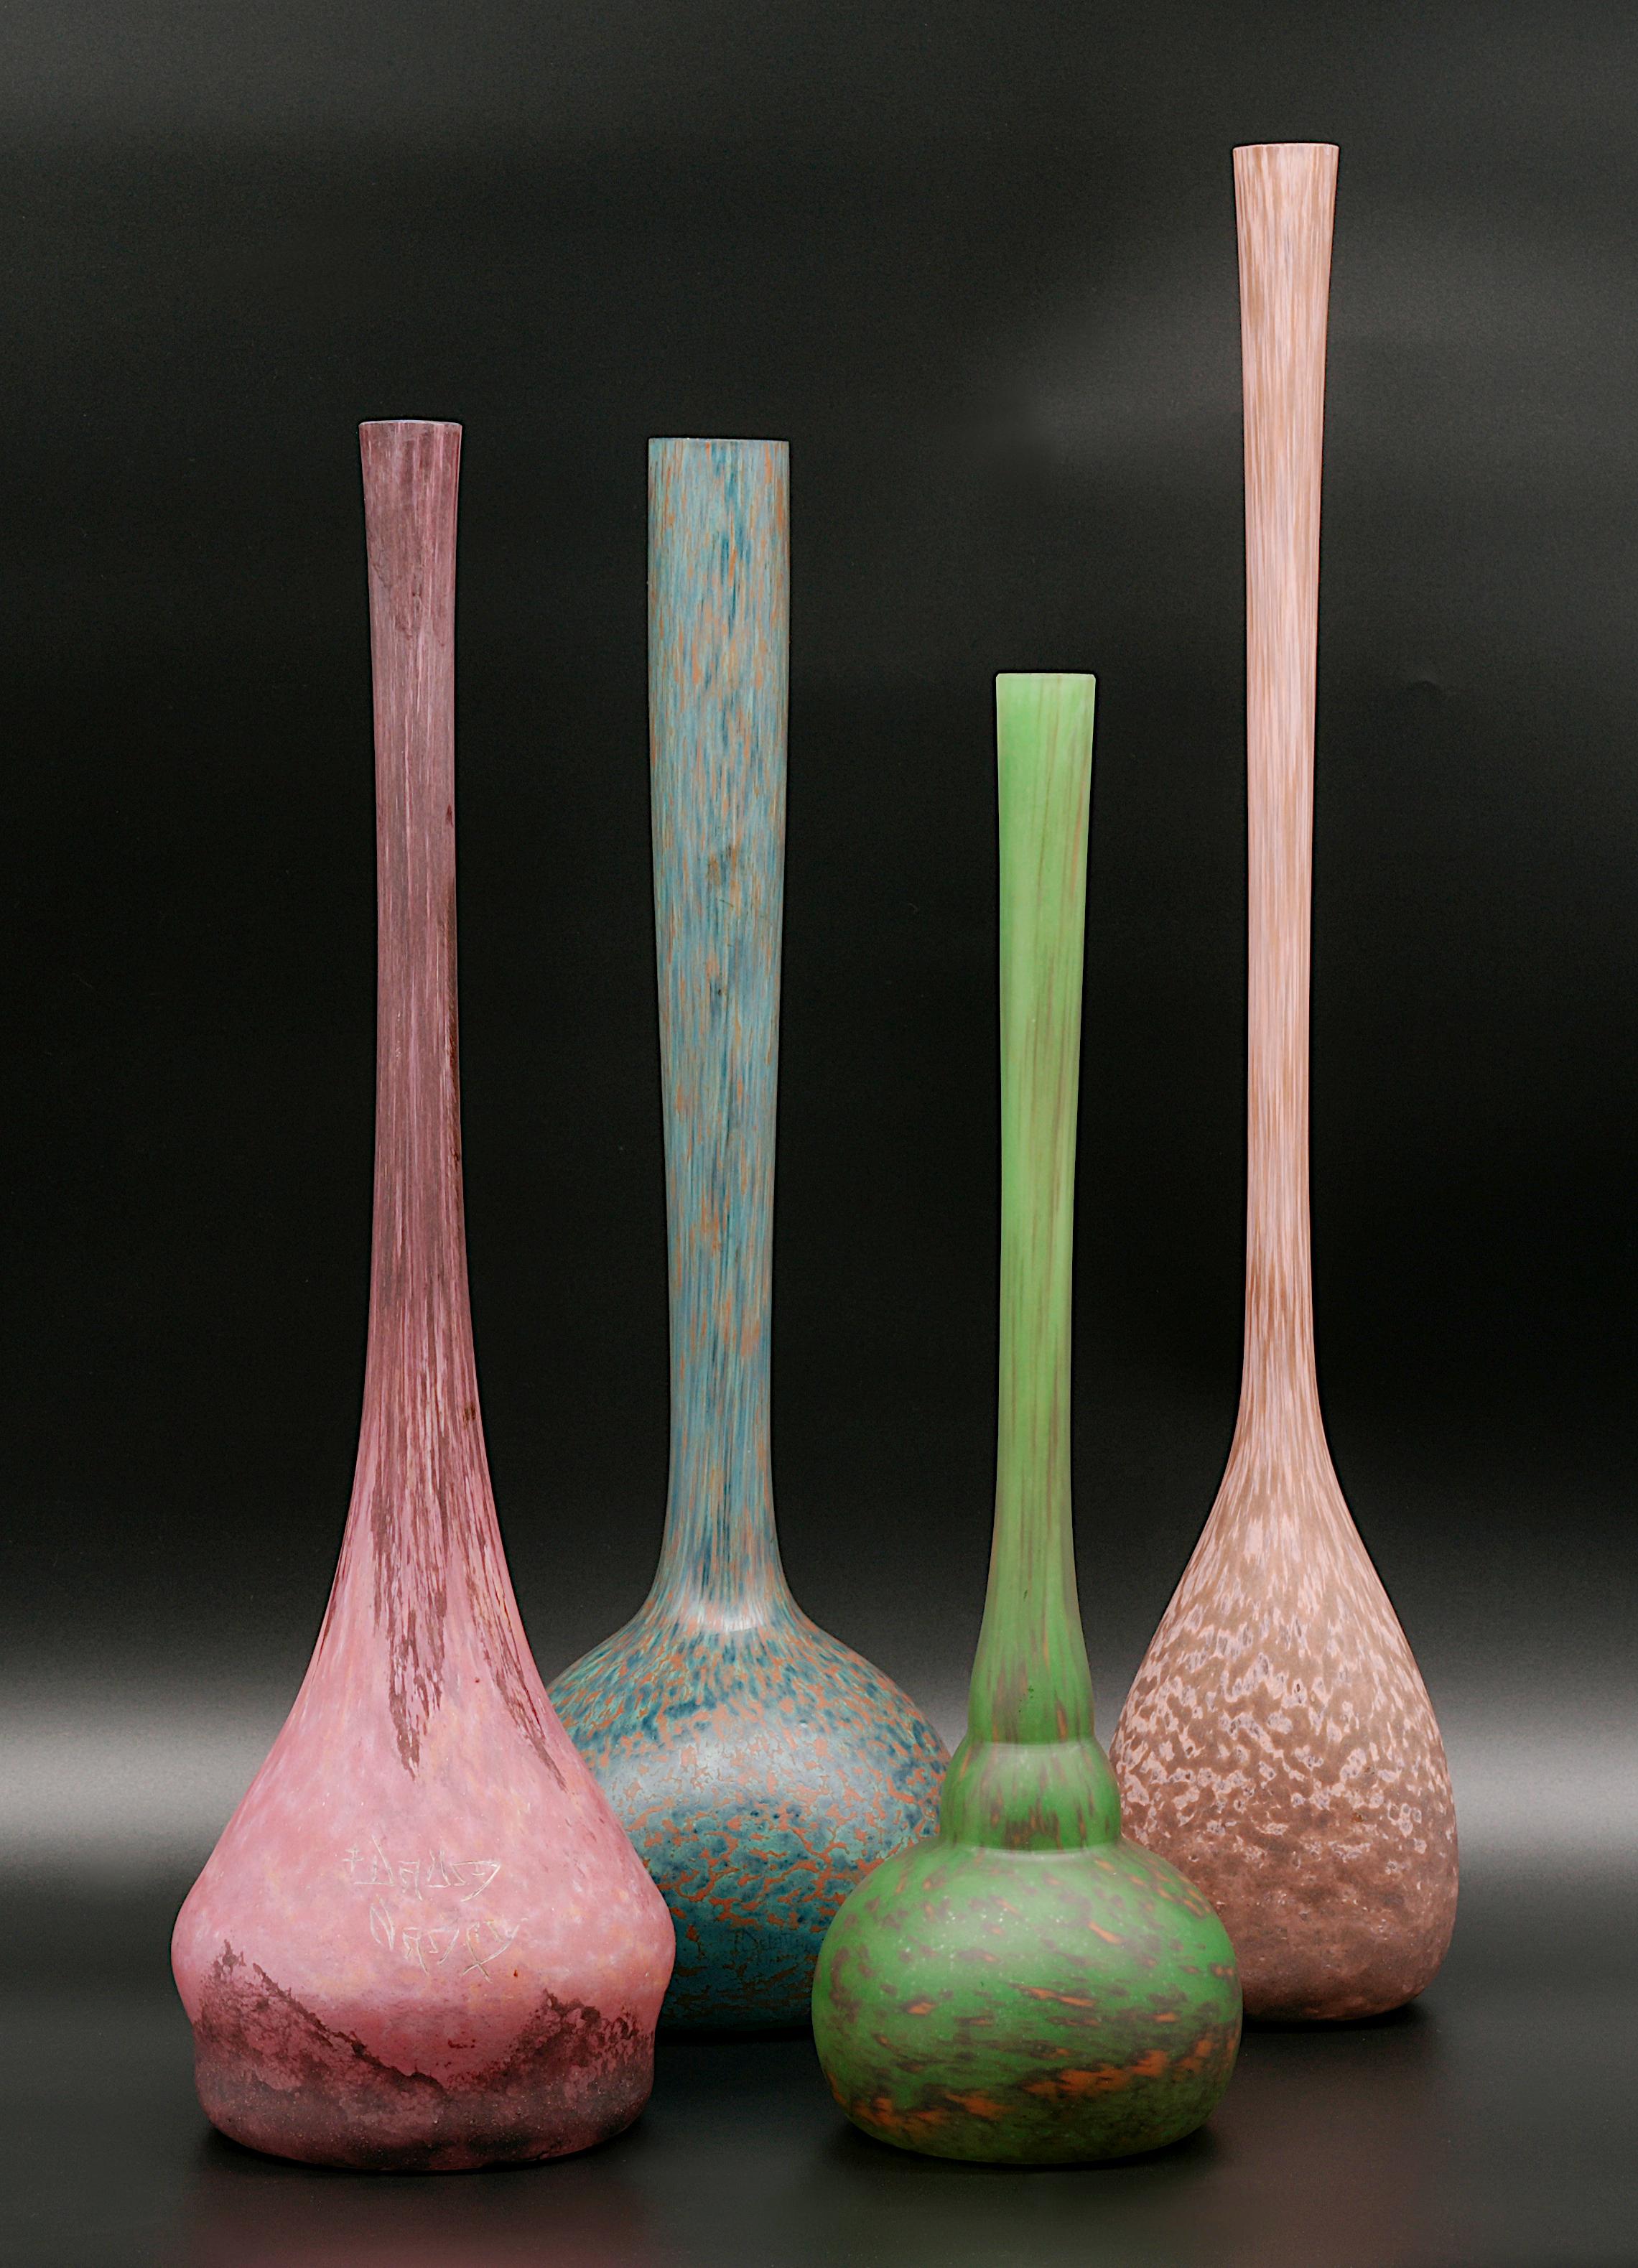 French Art Nouveau mottled glass single-flower vase by DAUM (Nancy), France, 1910-1915. Colors : pink, purple and orange. Height : 18.7